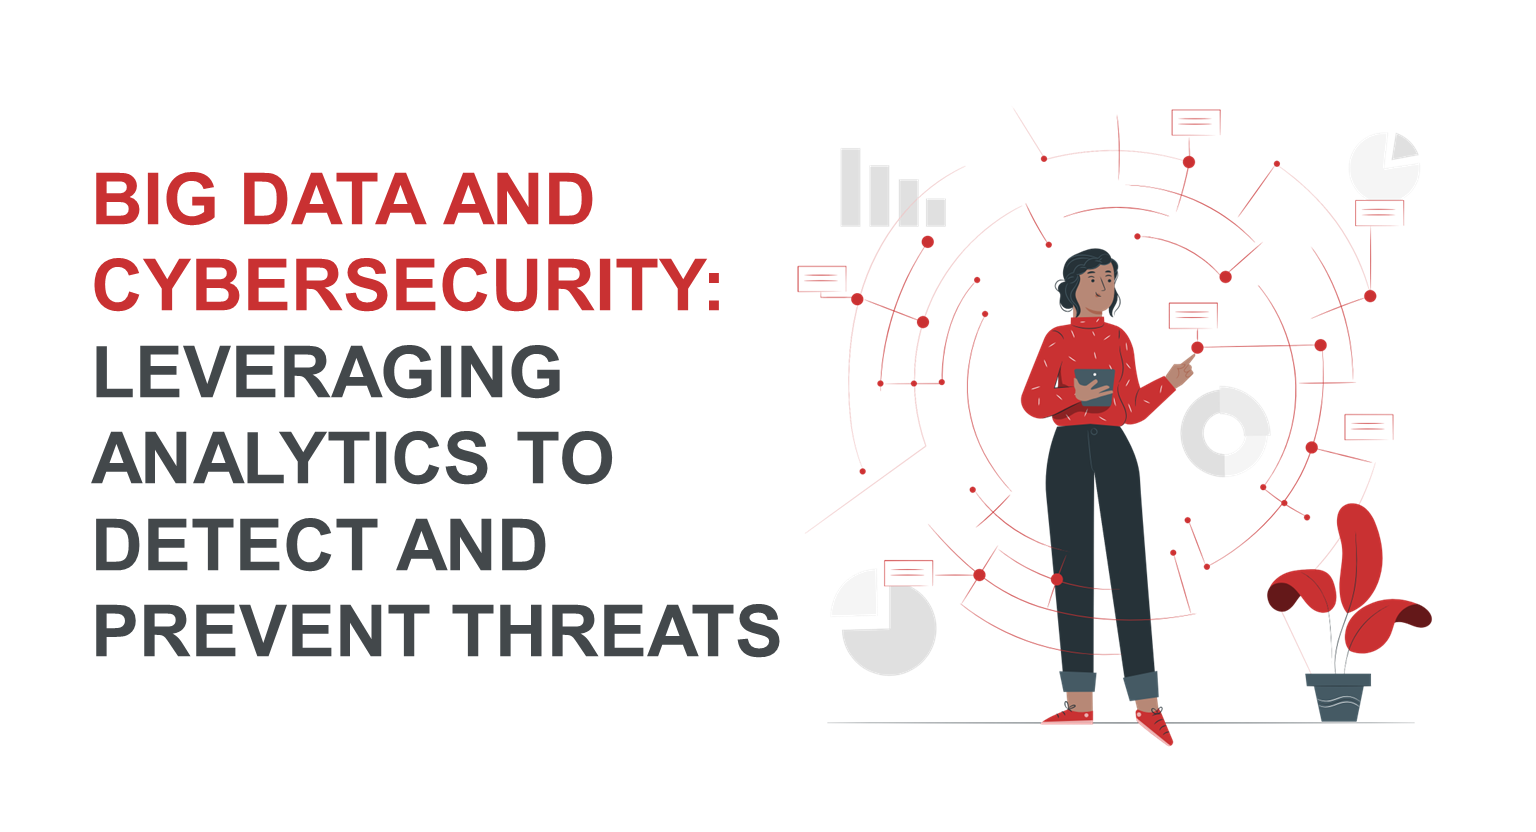 Big Data and Cybersecurity: Leveraging Analytics to Detect and Prevent Threats